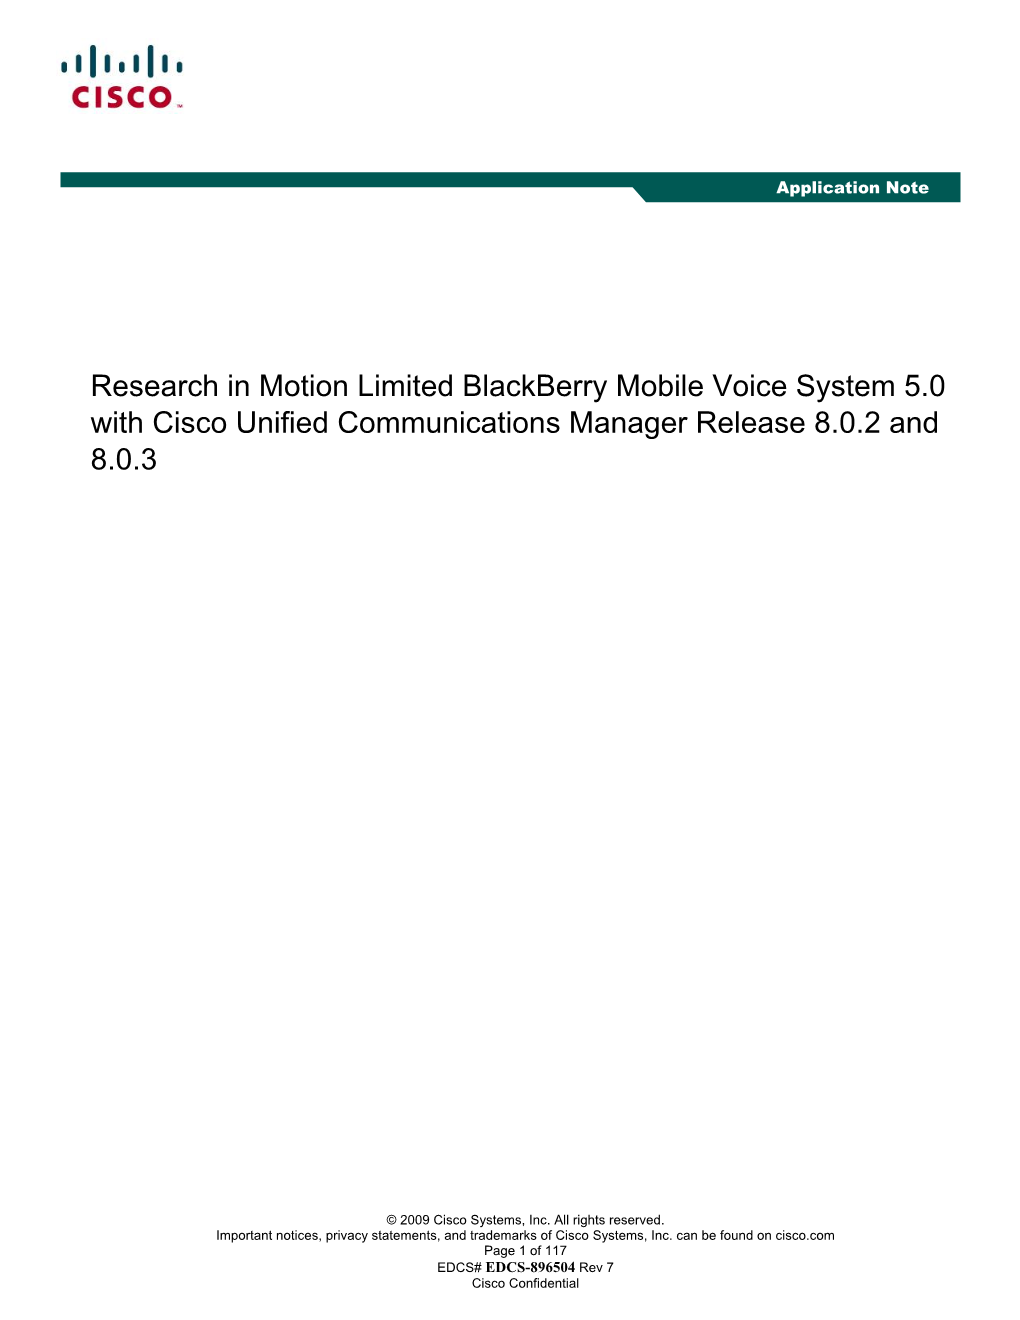 Research in Motion Limited Blackberry Mobile Voice System 5.0 with Cisco Unified Communications Manager Release 8.0.2 and 8.0.3